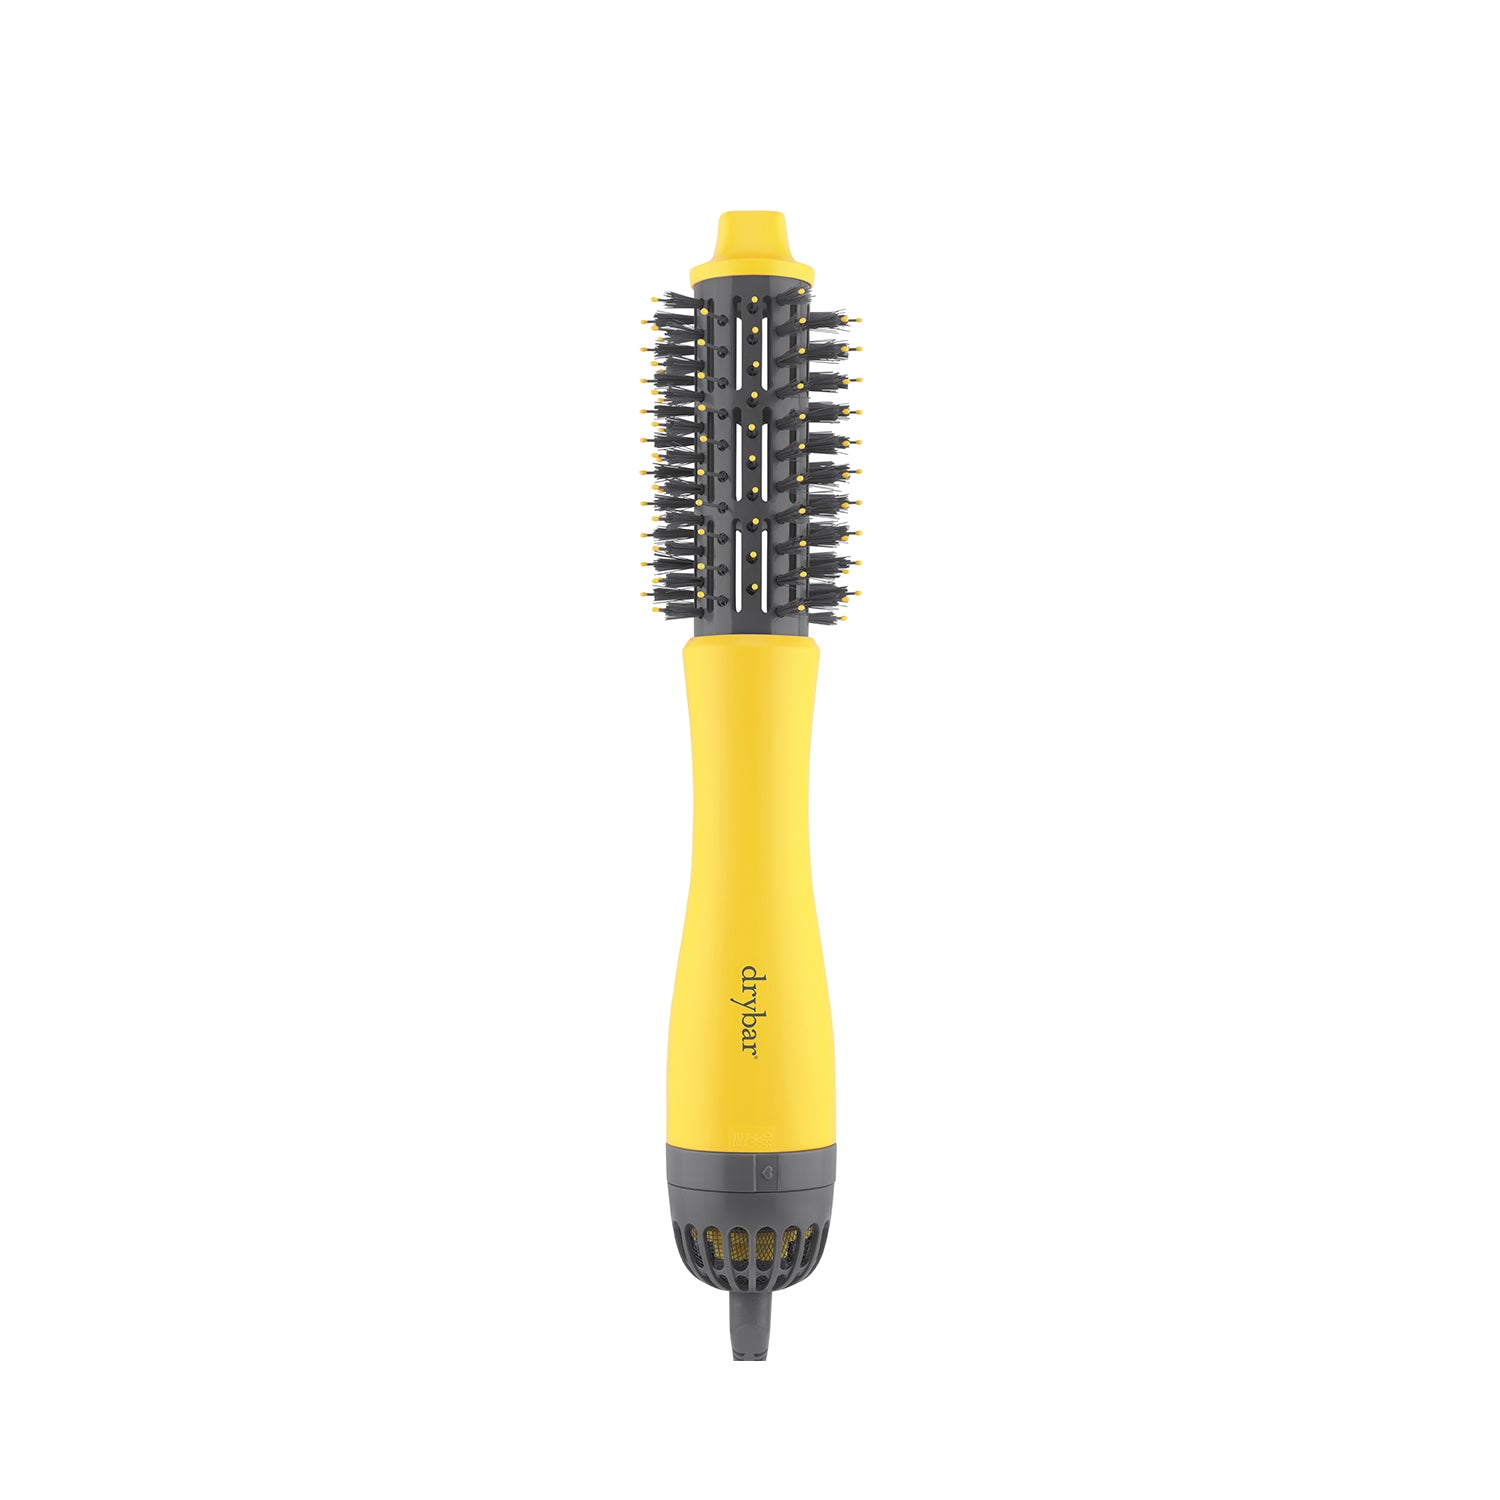 THE DOUBLE SHOT BLOW-DRYER BRUSH